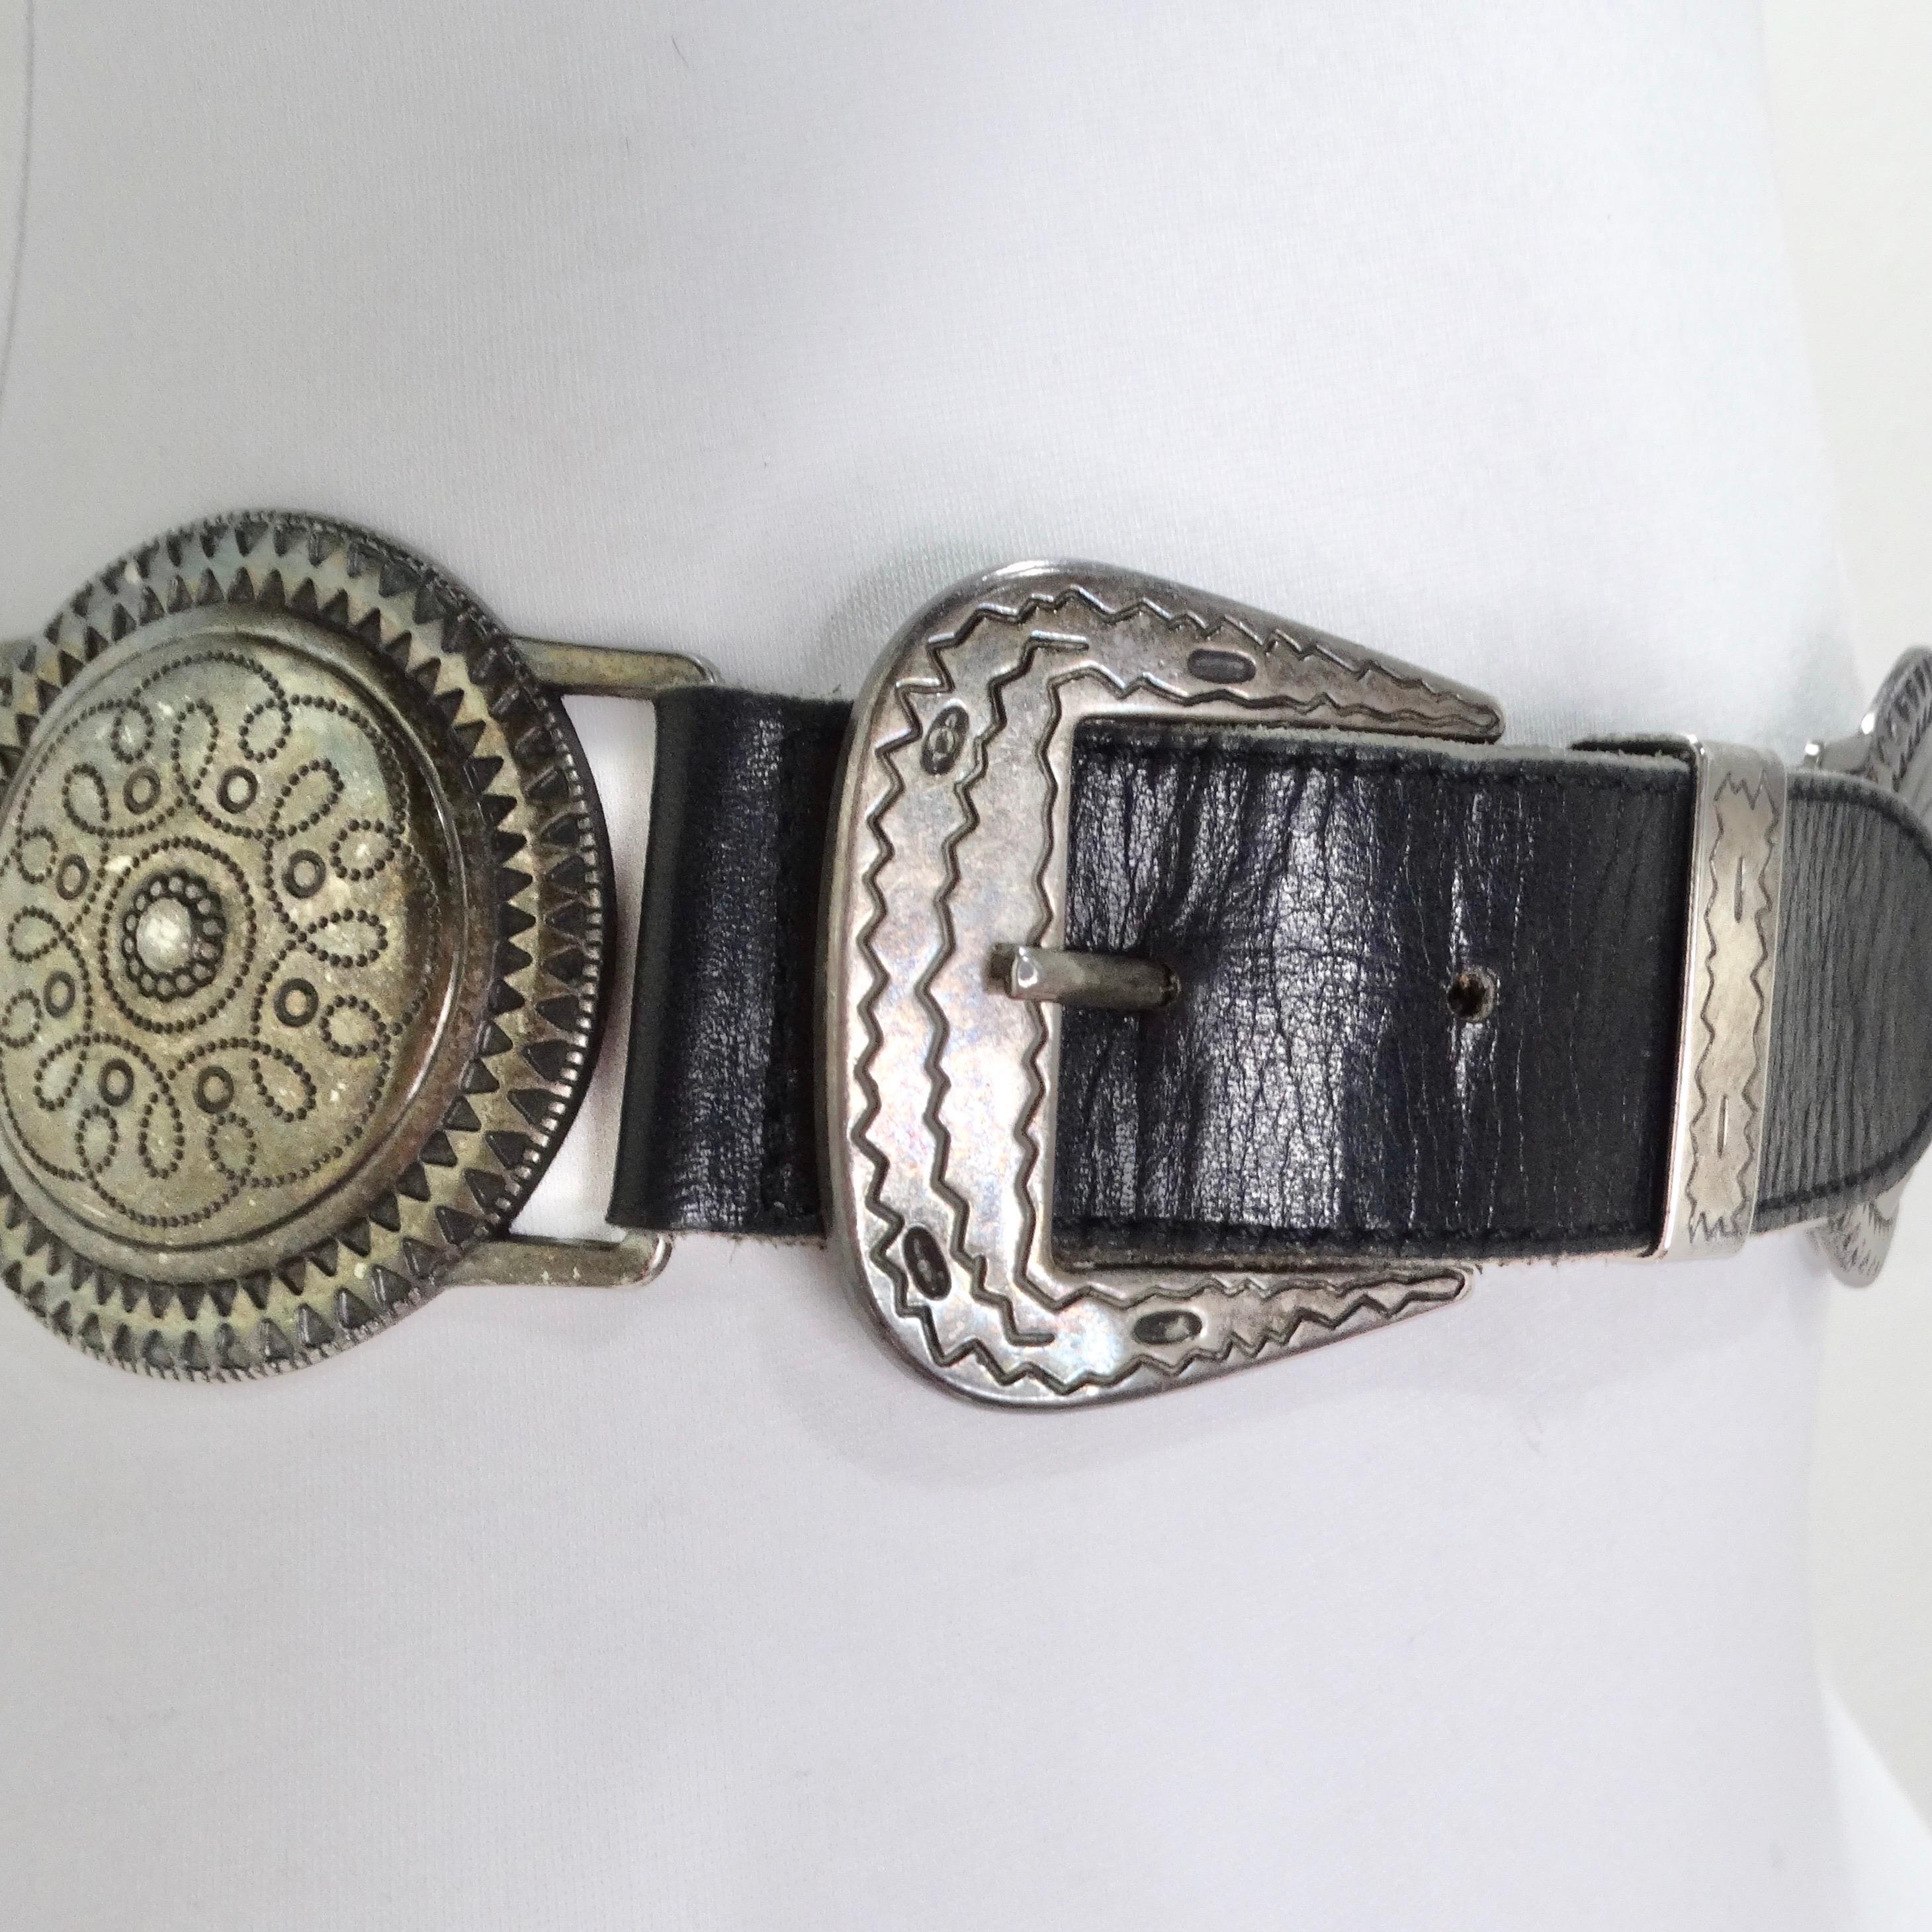 1980s Black Leather Belt In Good Condition For Sale In Scottsdale, AZ